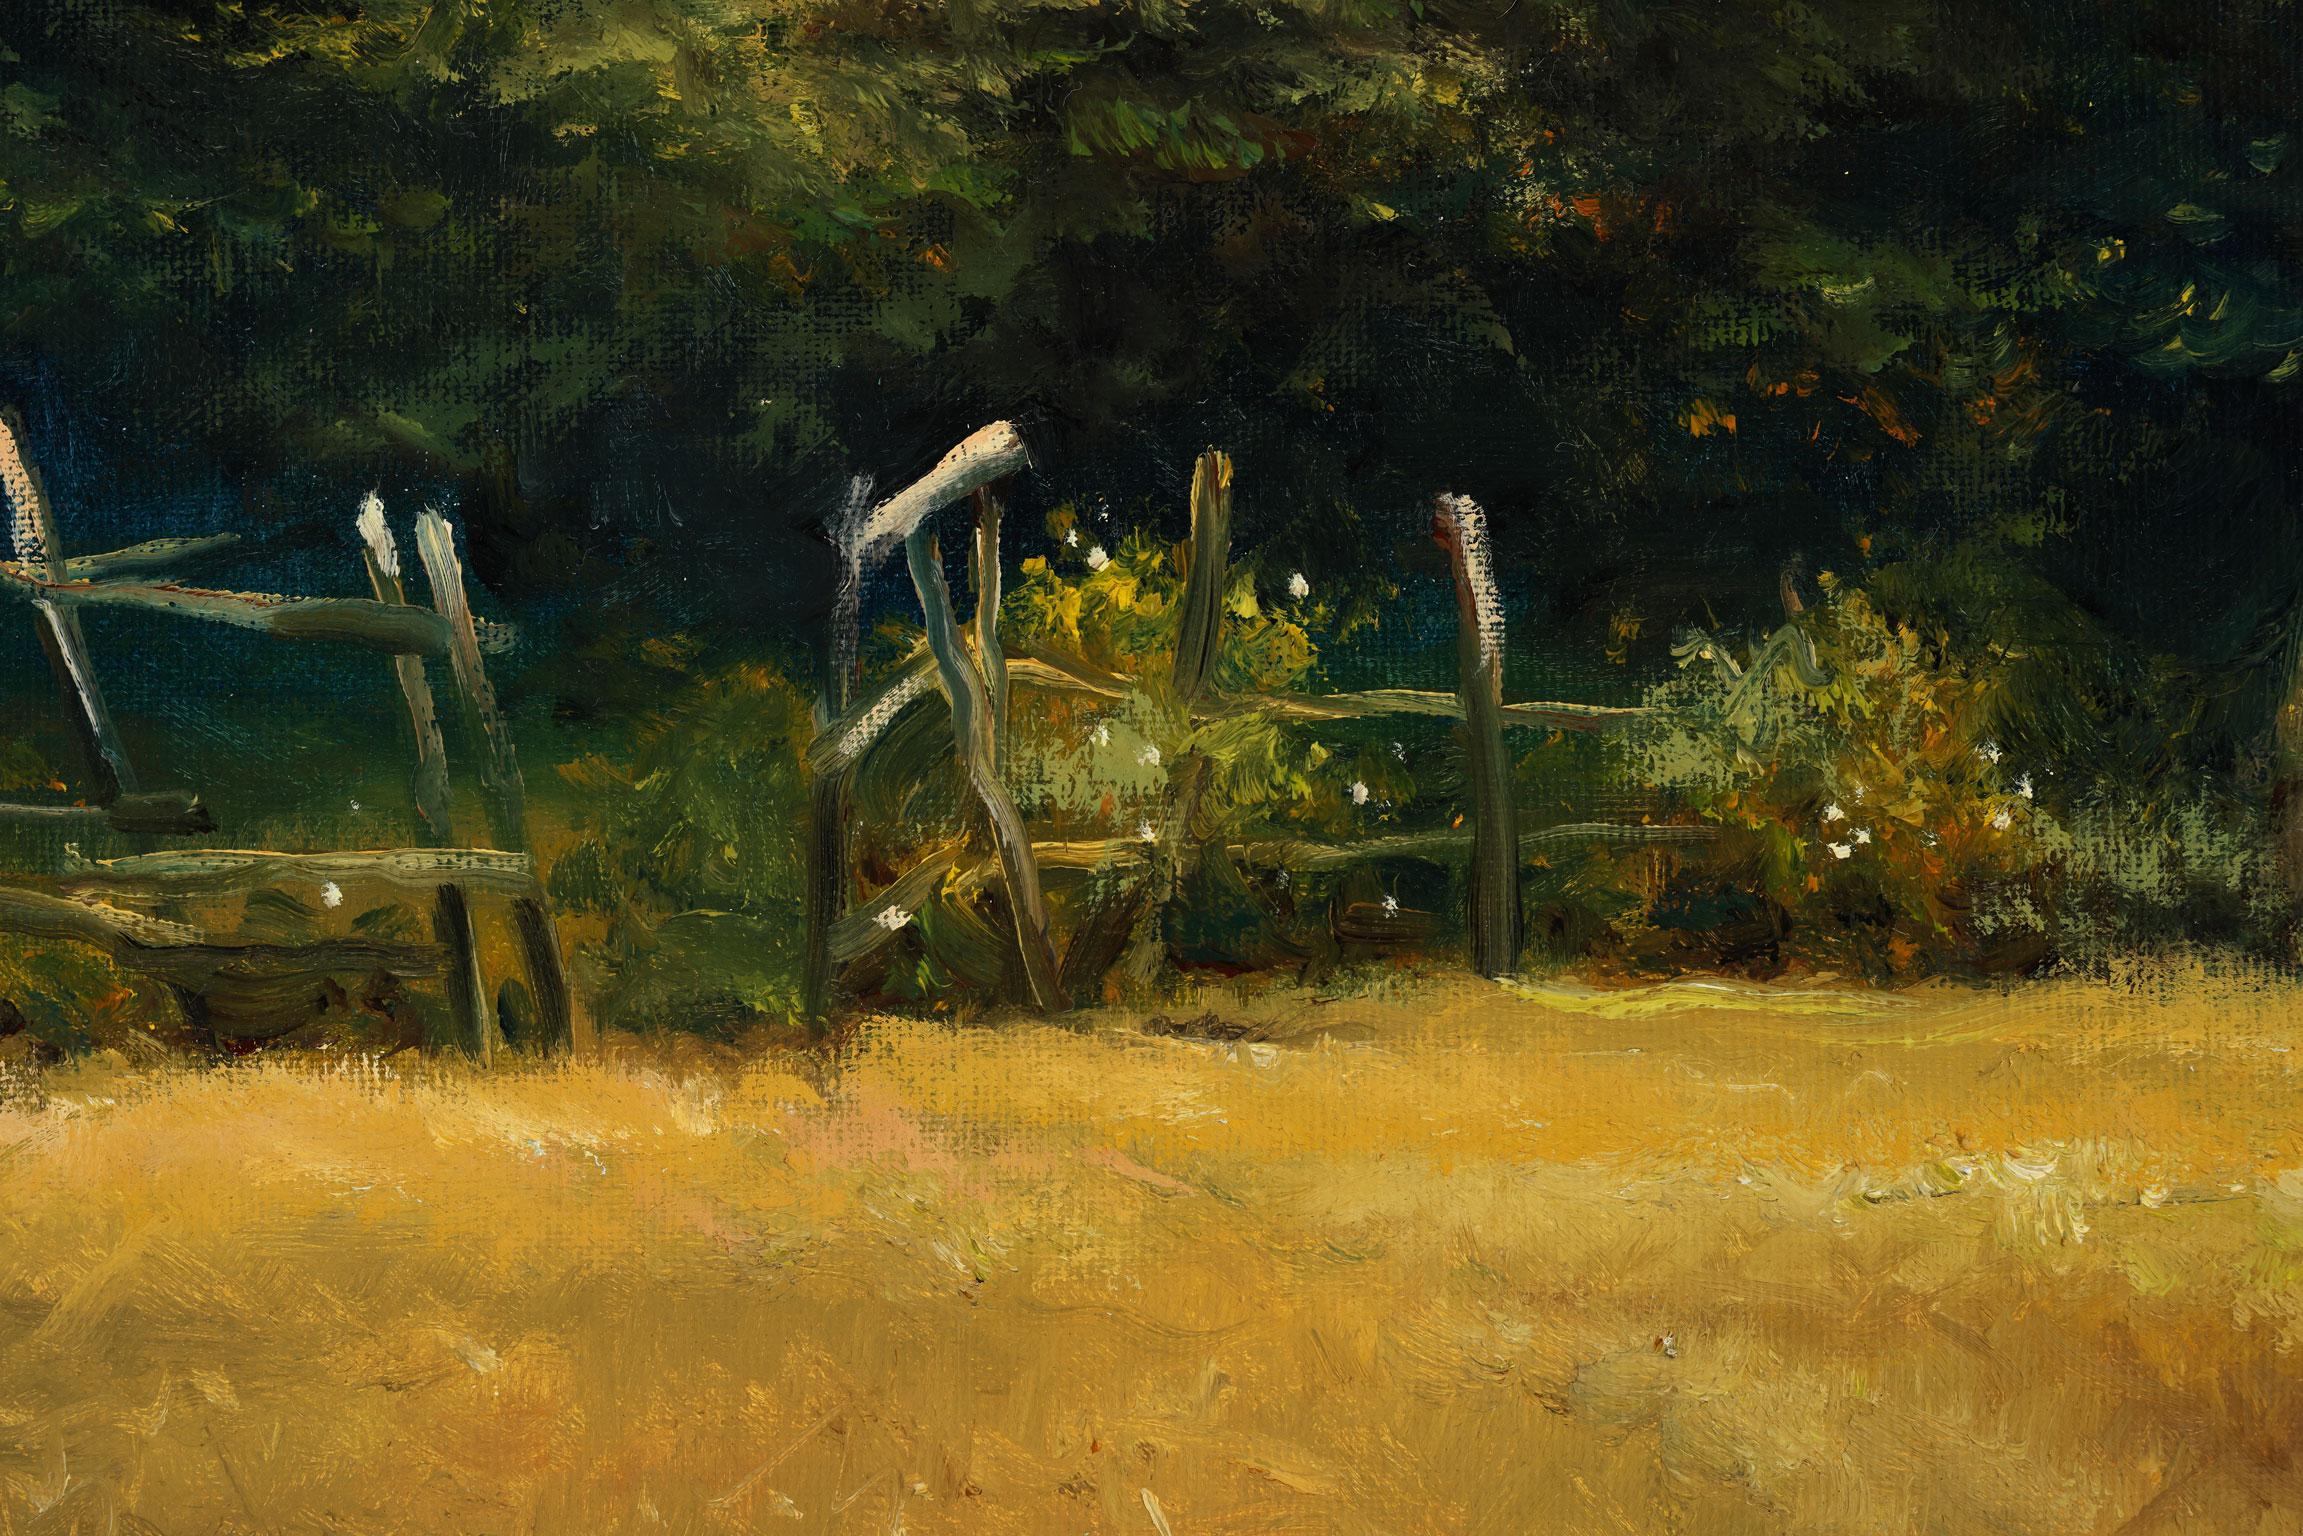 Untitled [Landscape], an original oil on canvas by Robert K. White, is a piece for the true collector. White’s careful attention to detail and vivid use of yellows, greens, and browns project from the painting, immediately capturing the viewer's